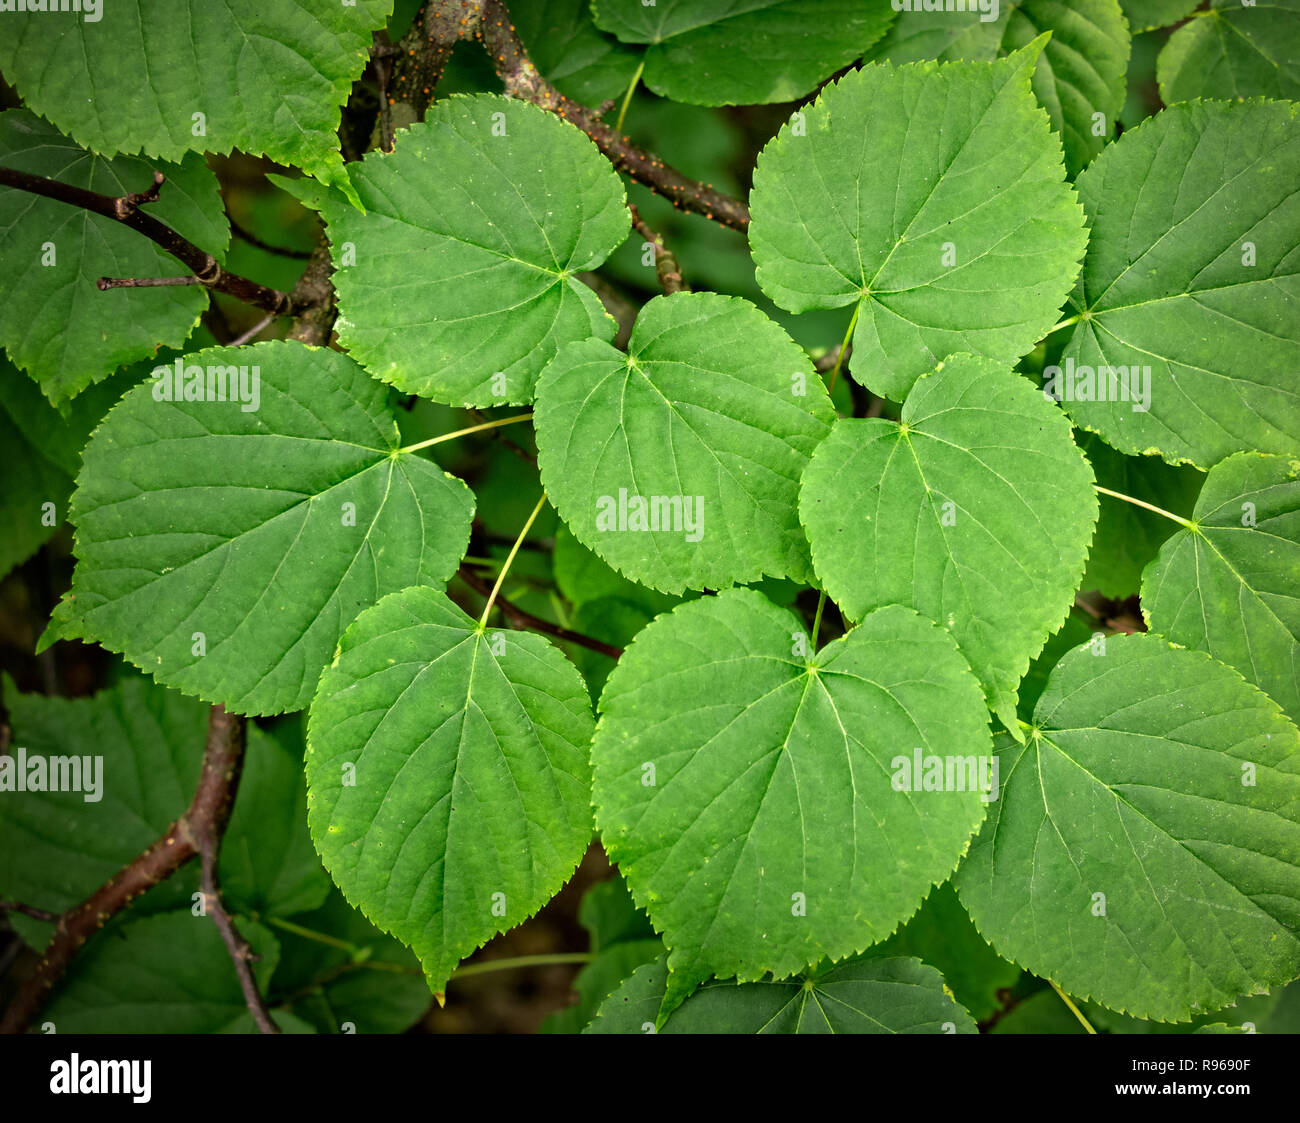 Group of heart-shaped leaves of small-leaved lime tree Stock Photo